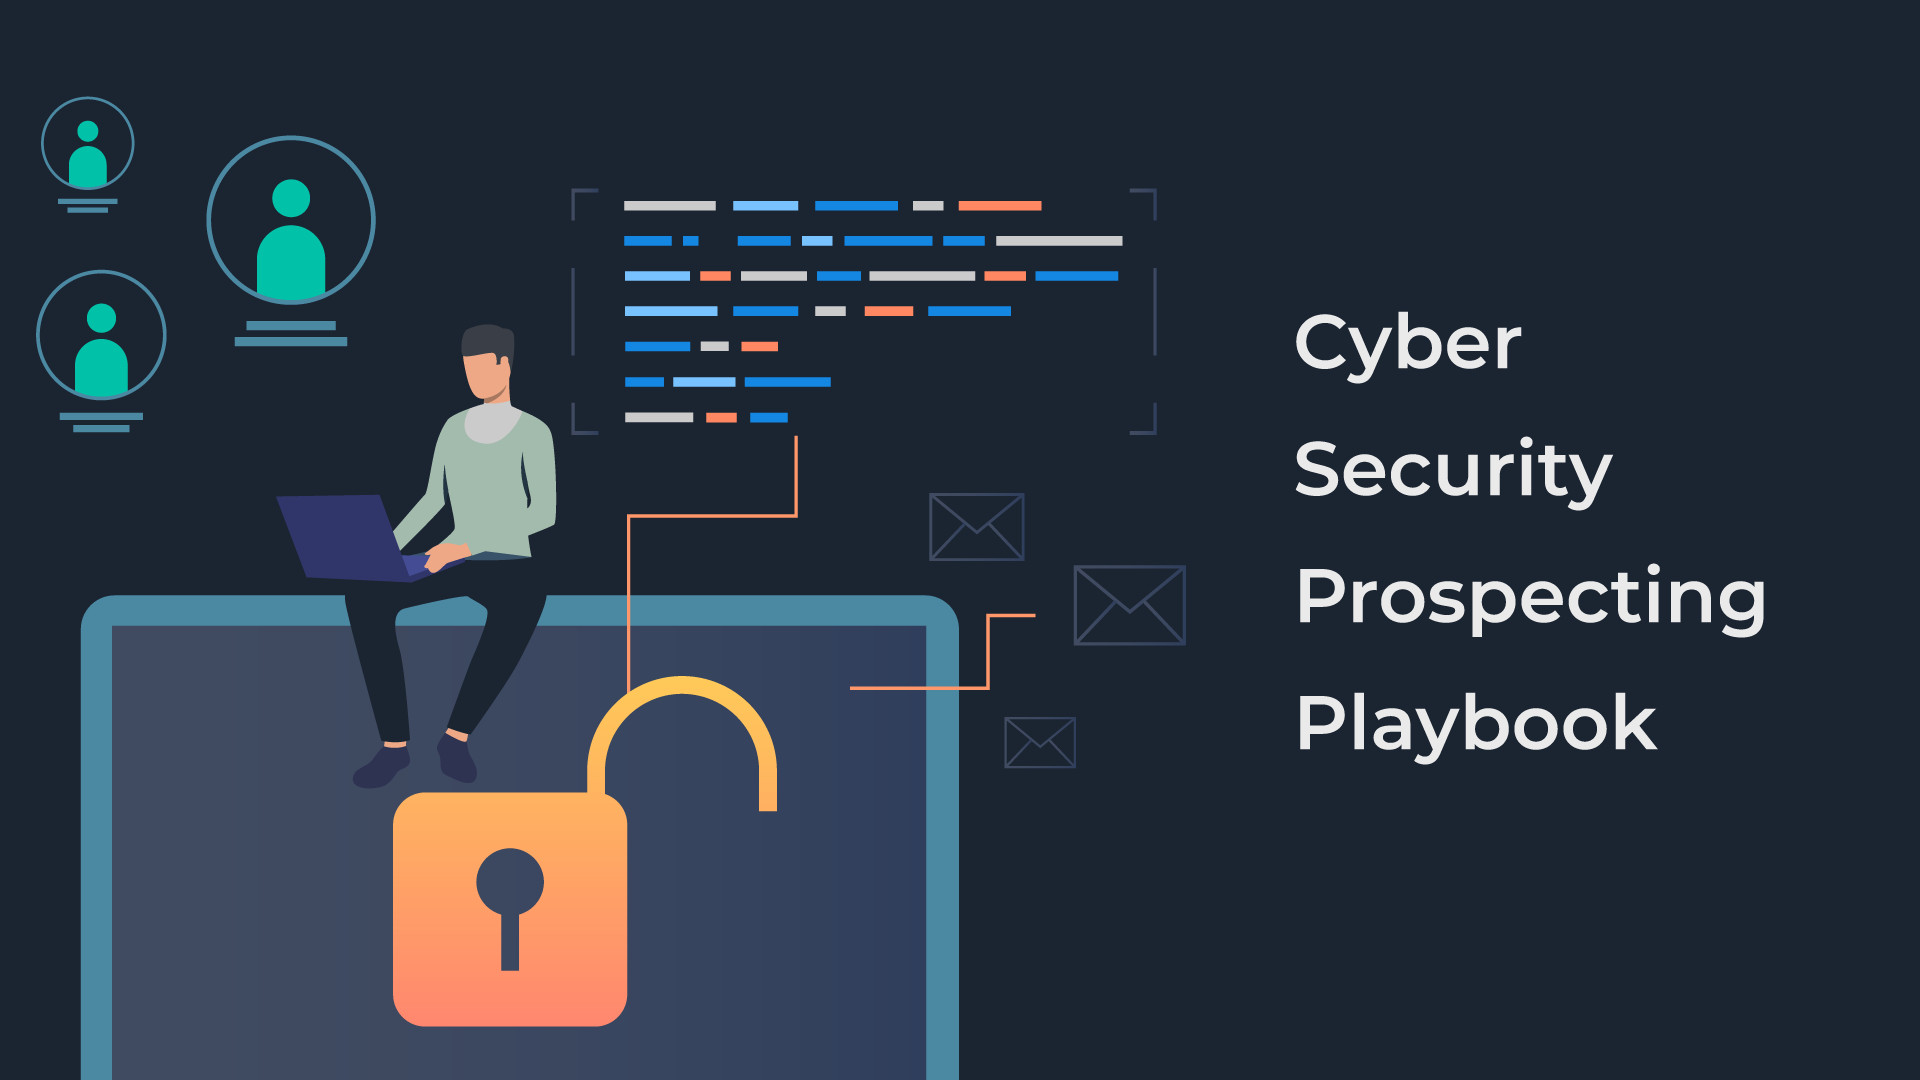 Cyber Security Prospecting Playbook